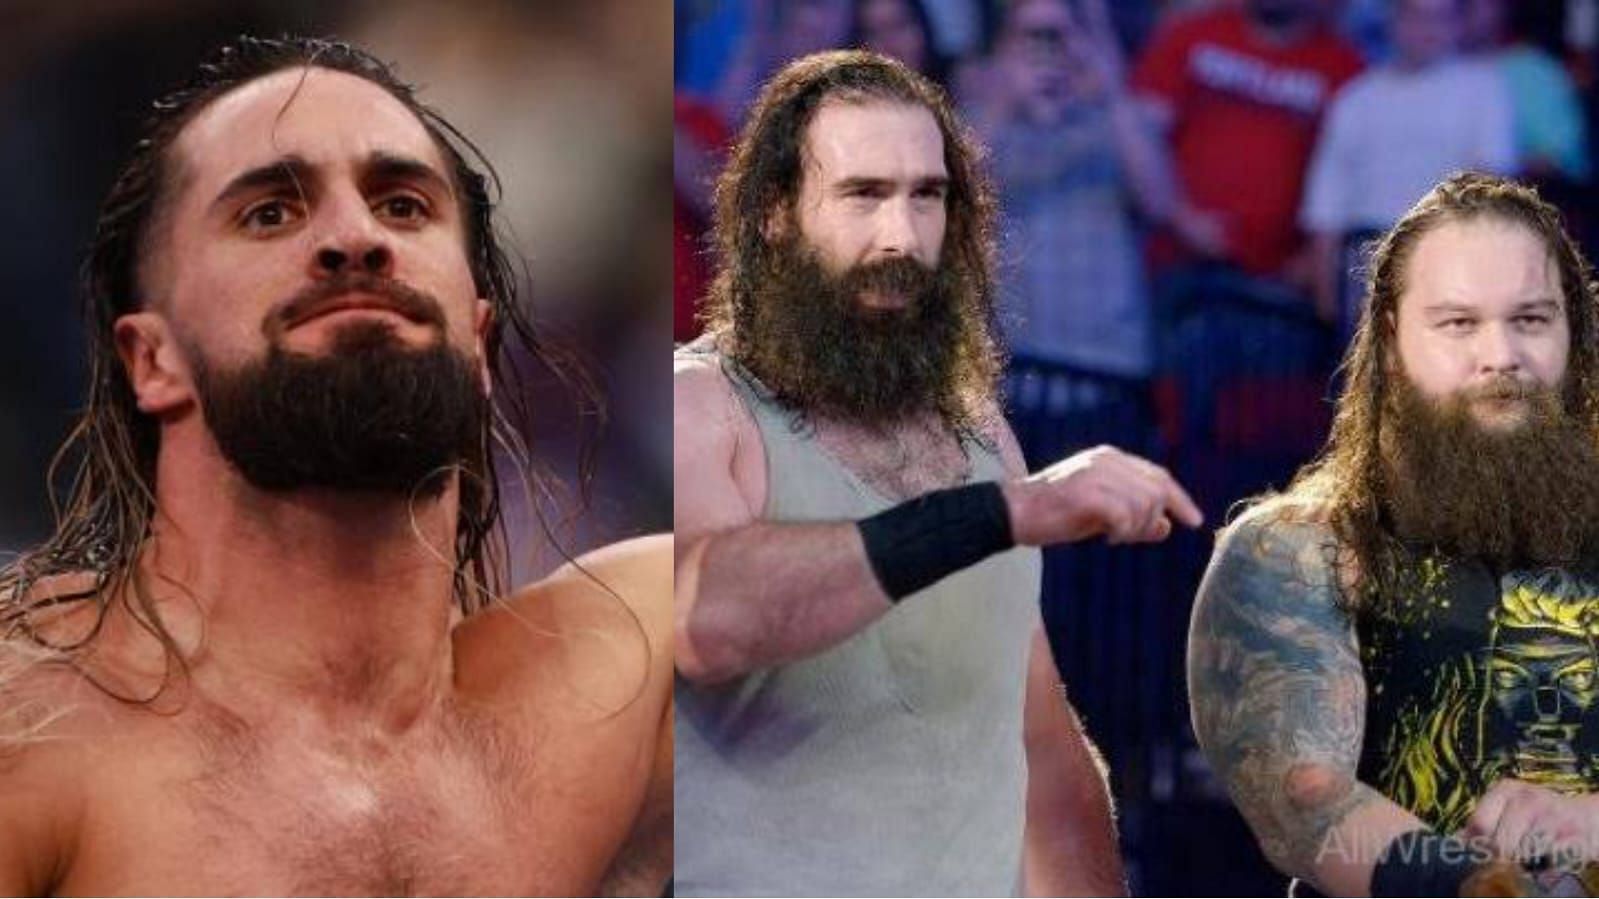 Seth Rollins was good friends with Wyatt and Lee